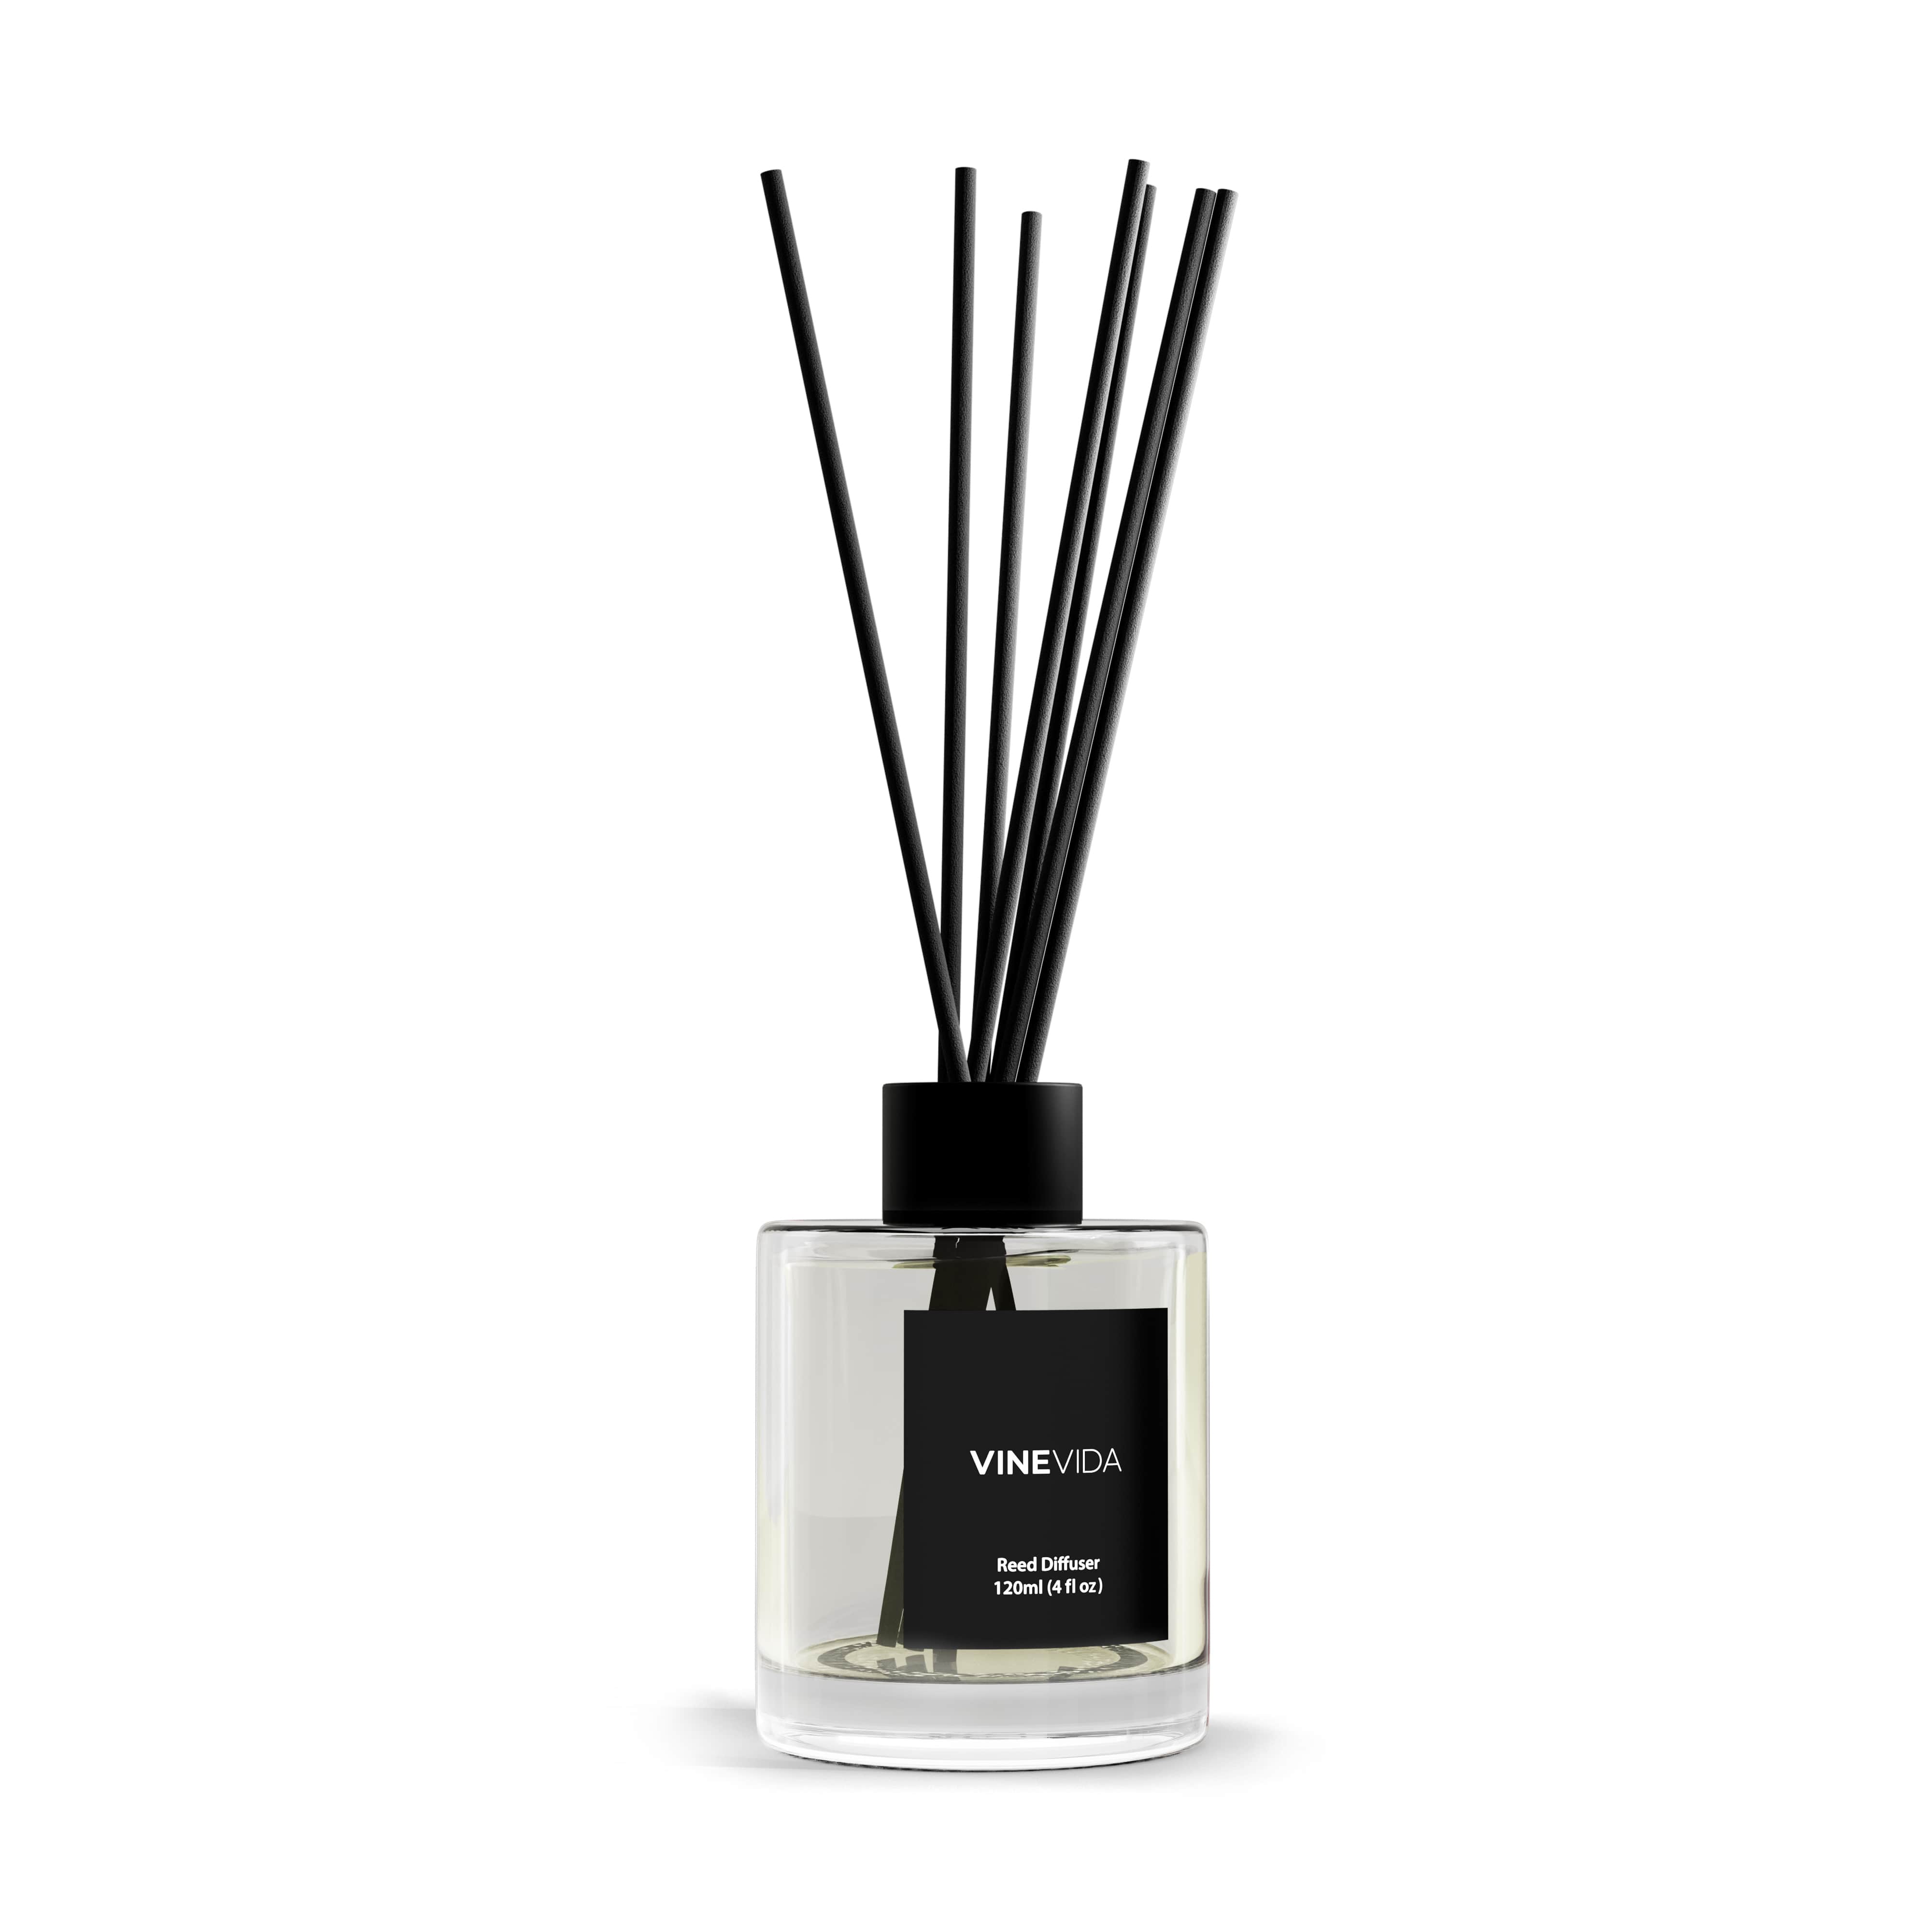 NO. 1404 Reed Diffuser - Inspired by: Indigo by Nest